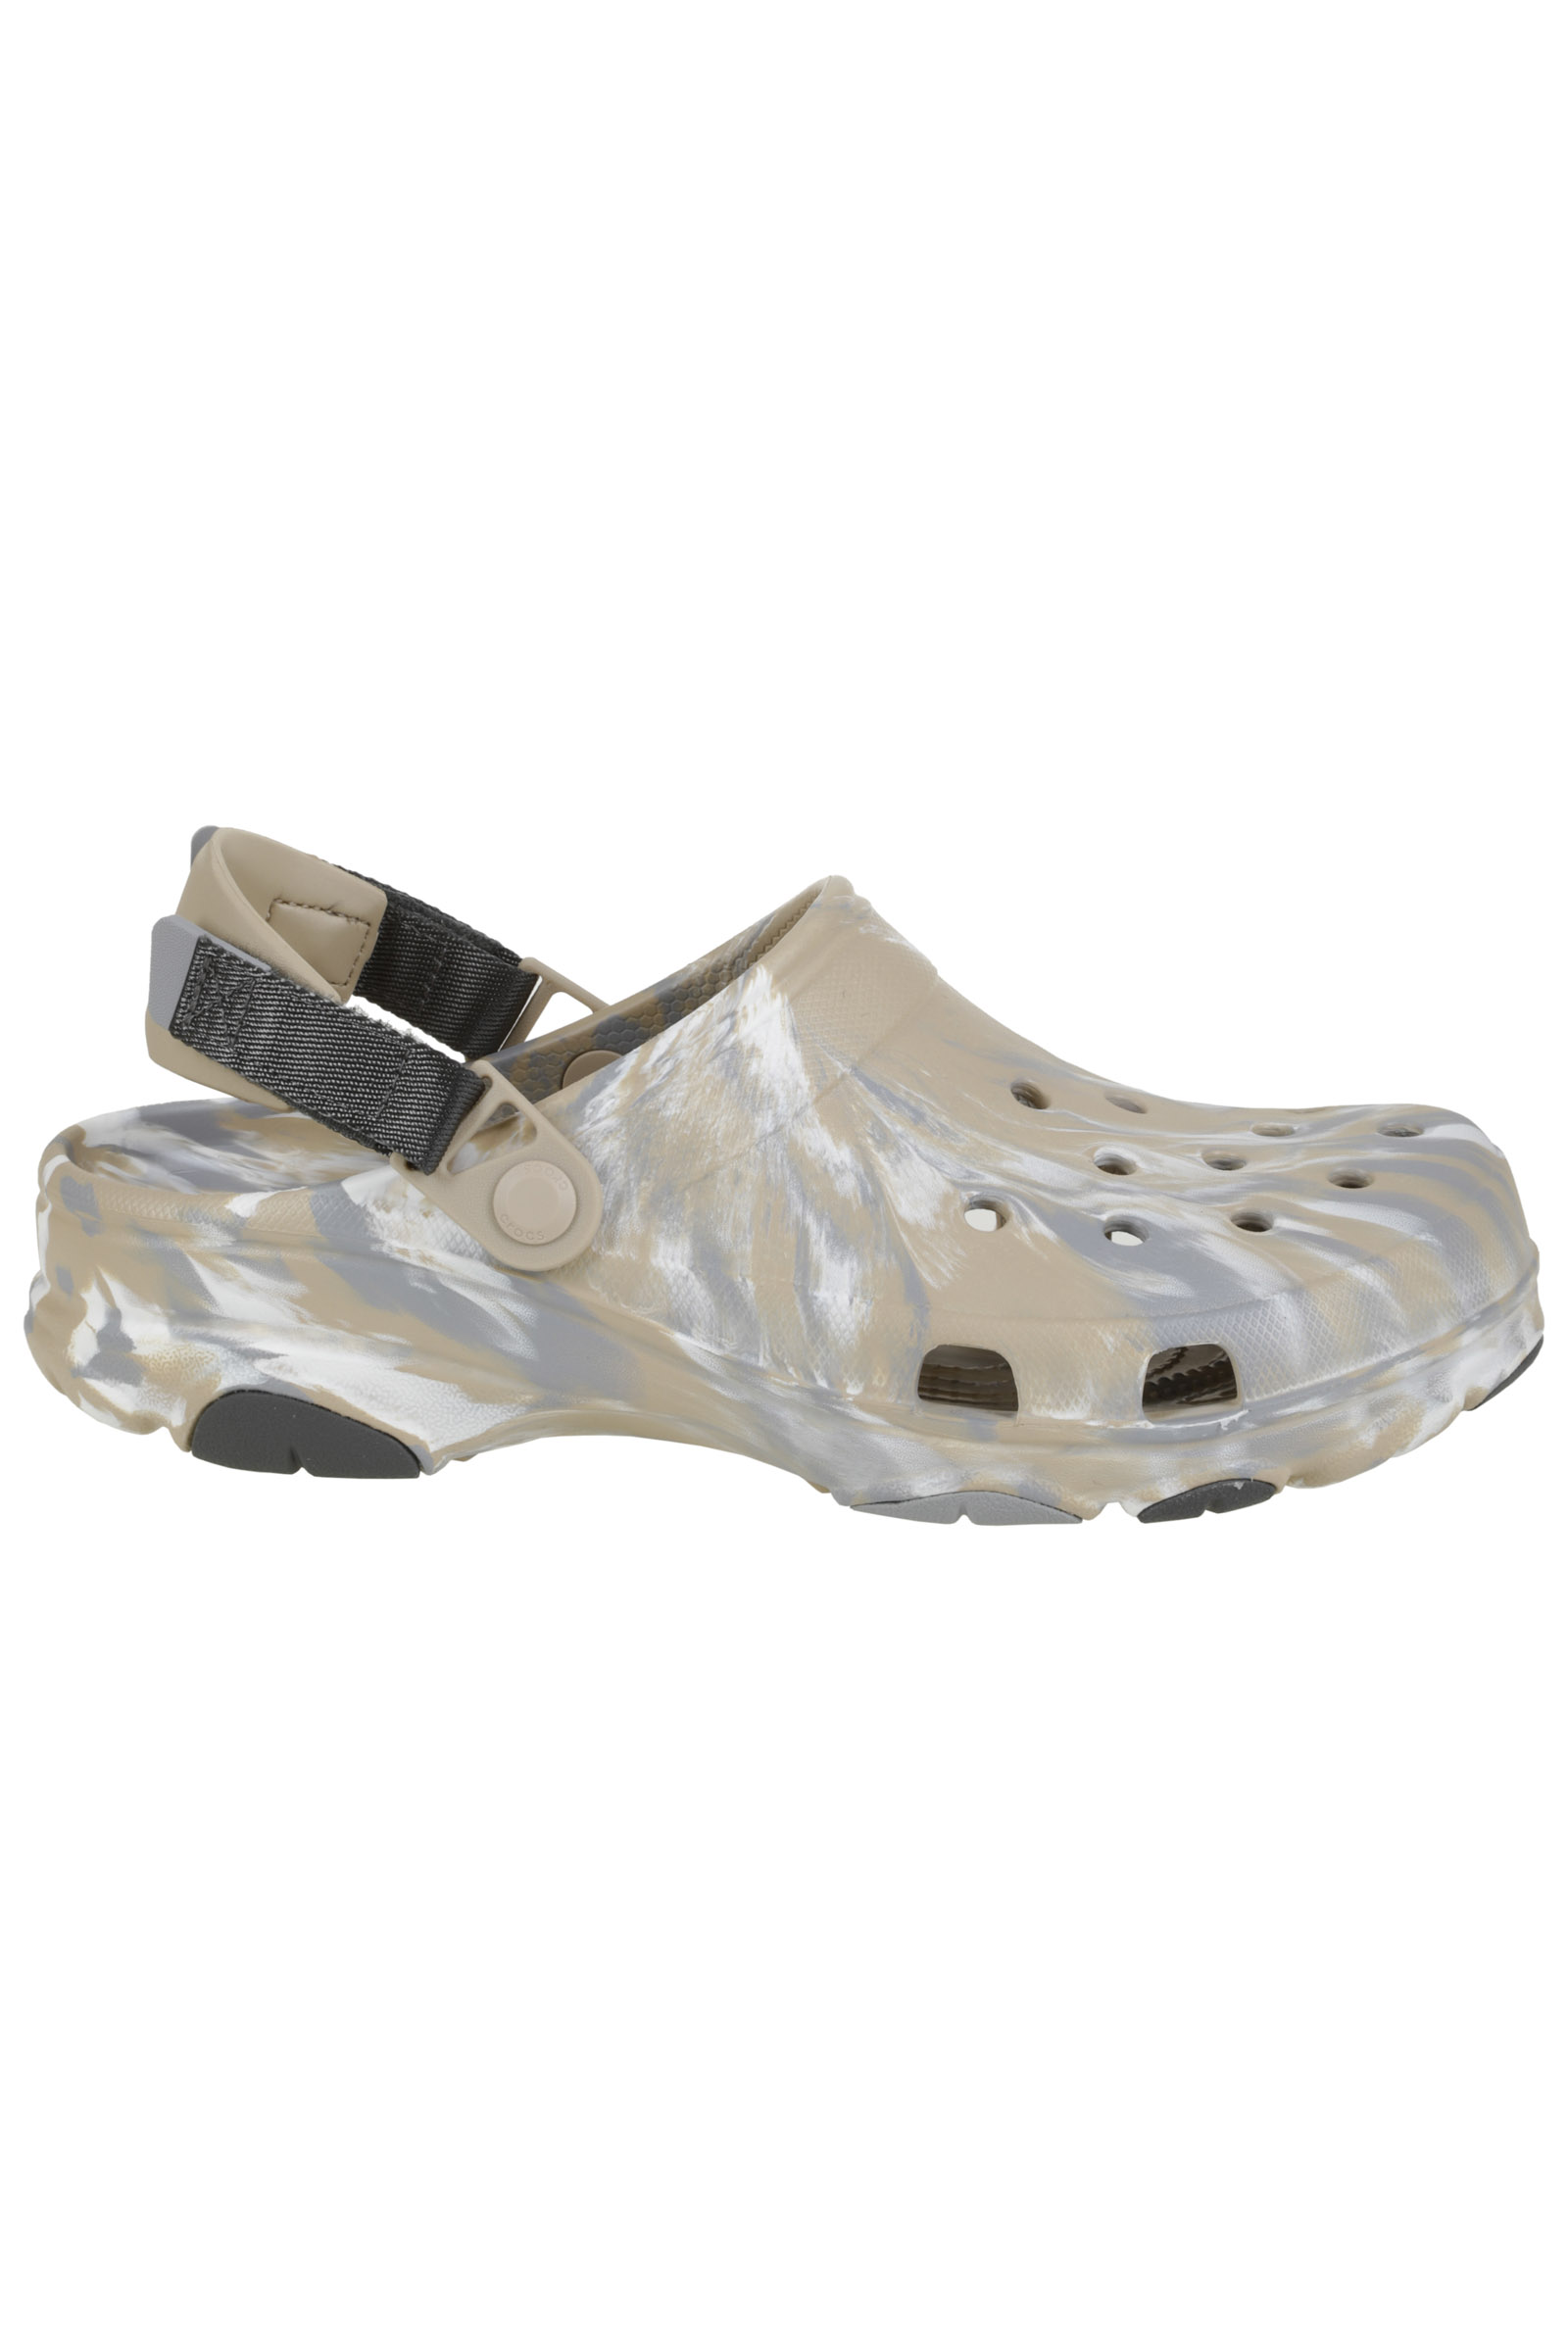 Picture of Crocs | Cls All-Terrain Marbled Clog M